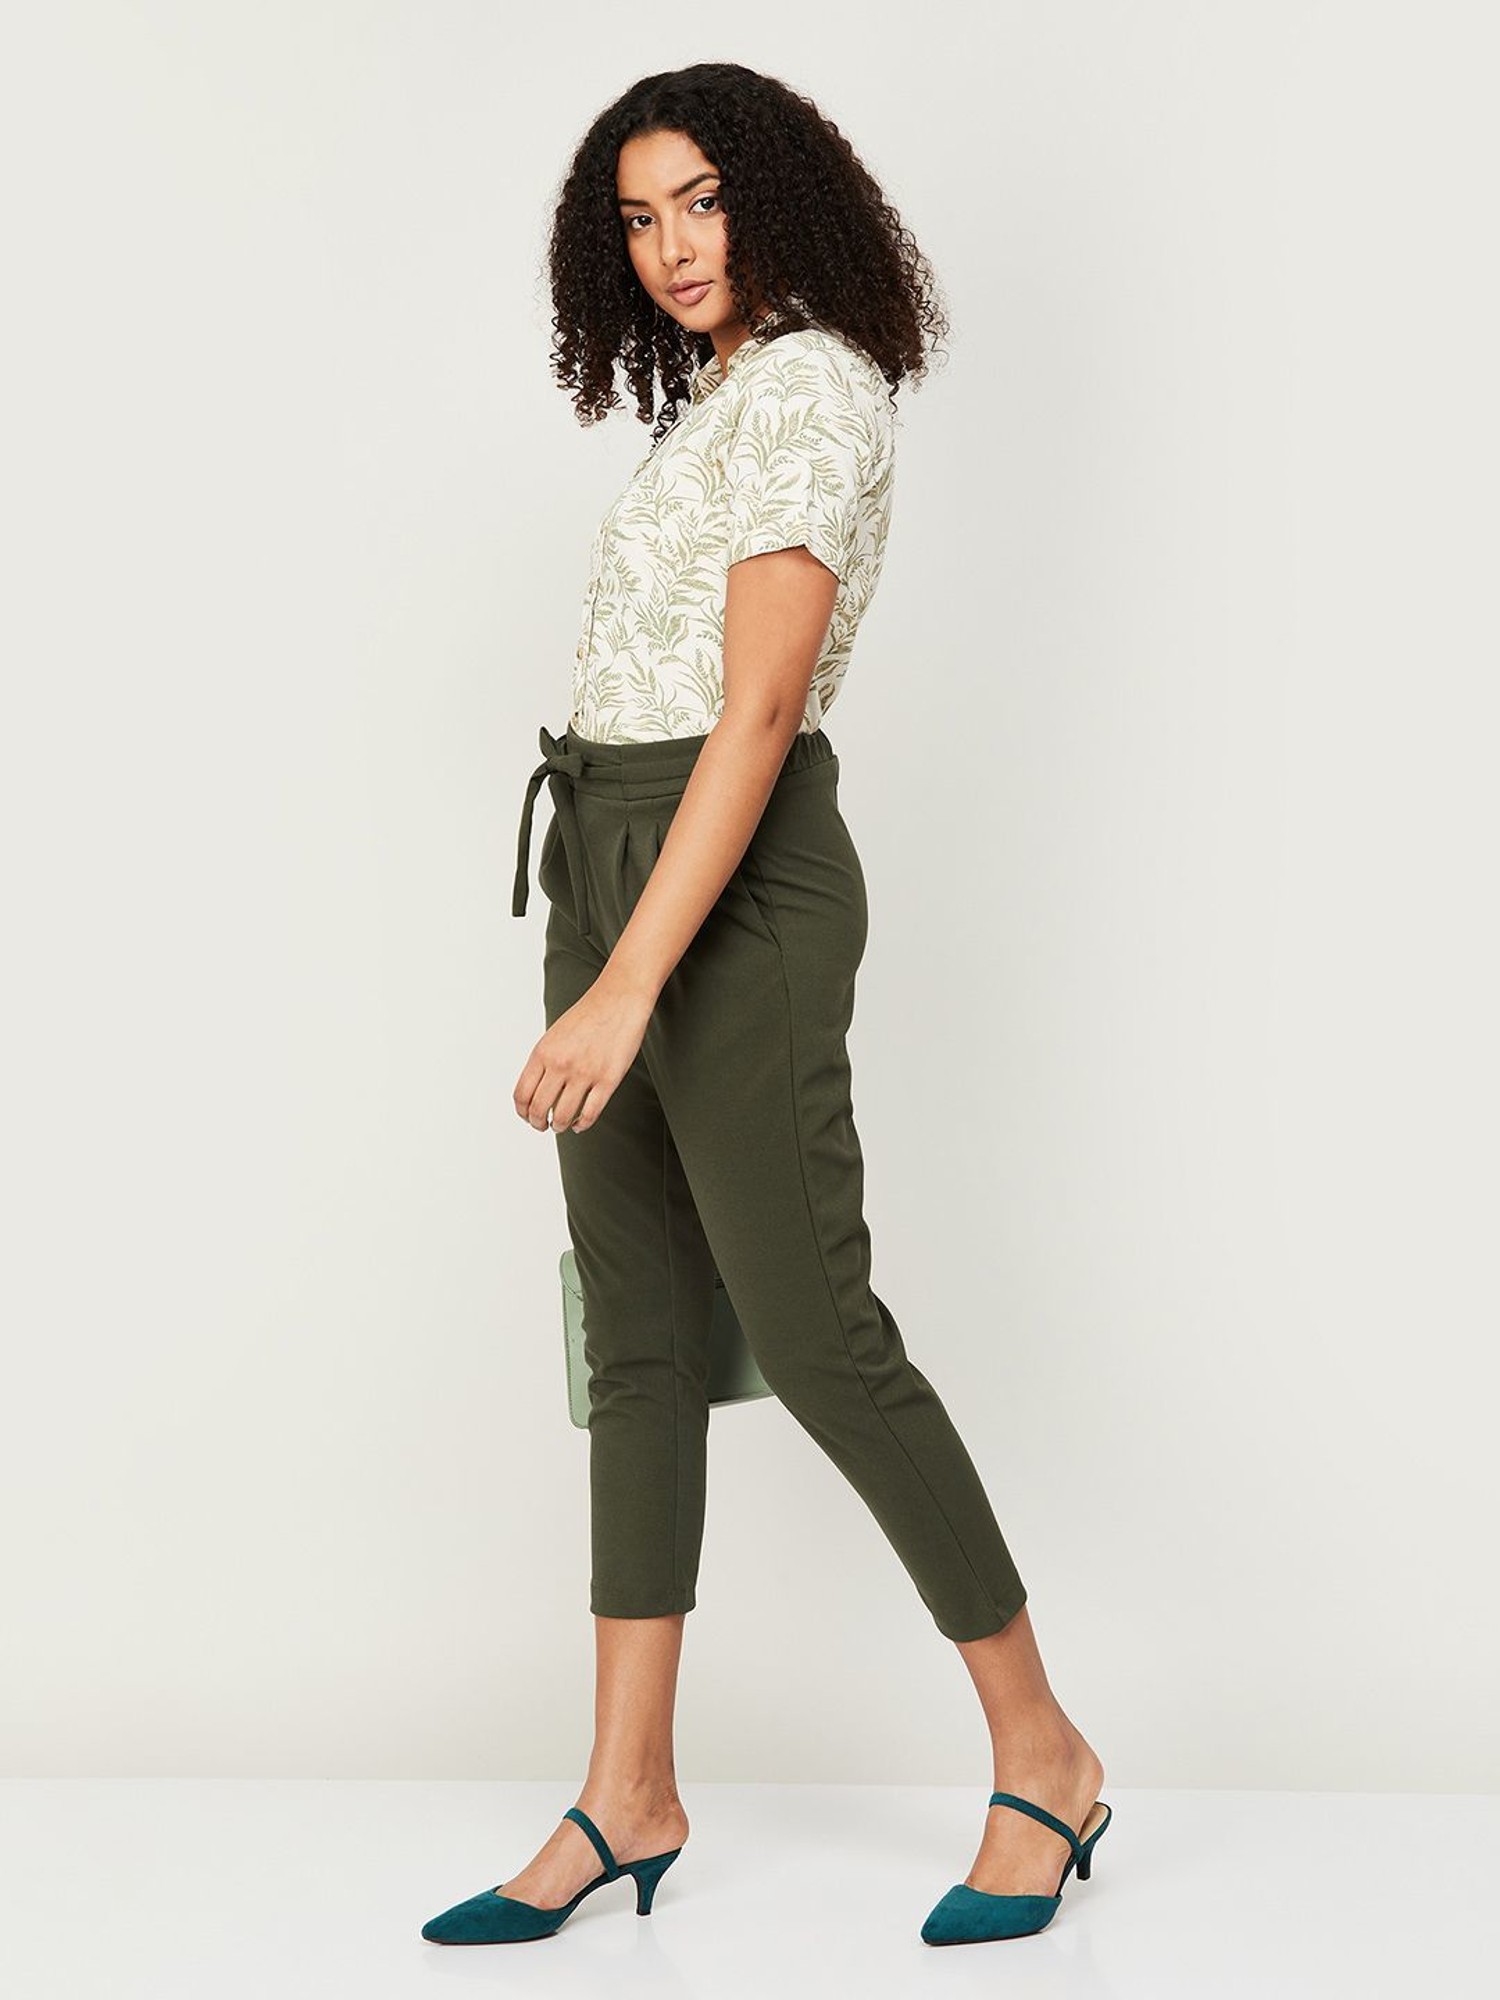 Elle NWT Olive Green City Chic Capri Pants 2 - $30 (31% Off Retail) New  With Tags - From Nalleli